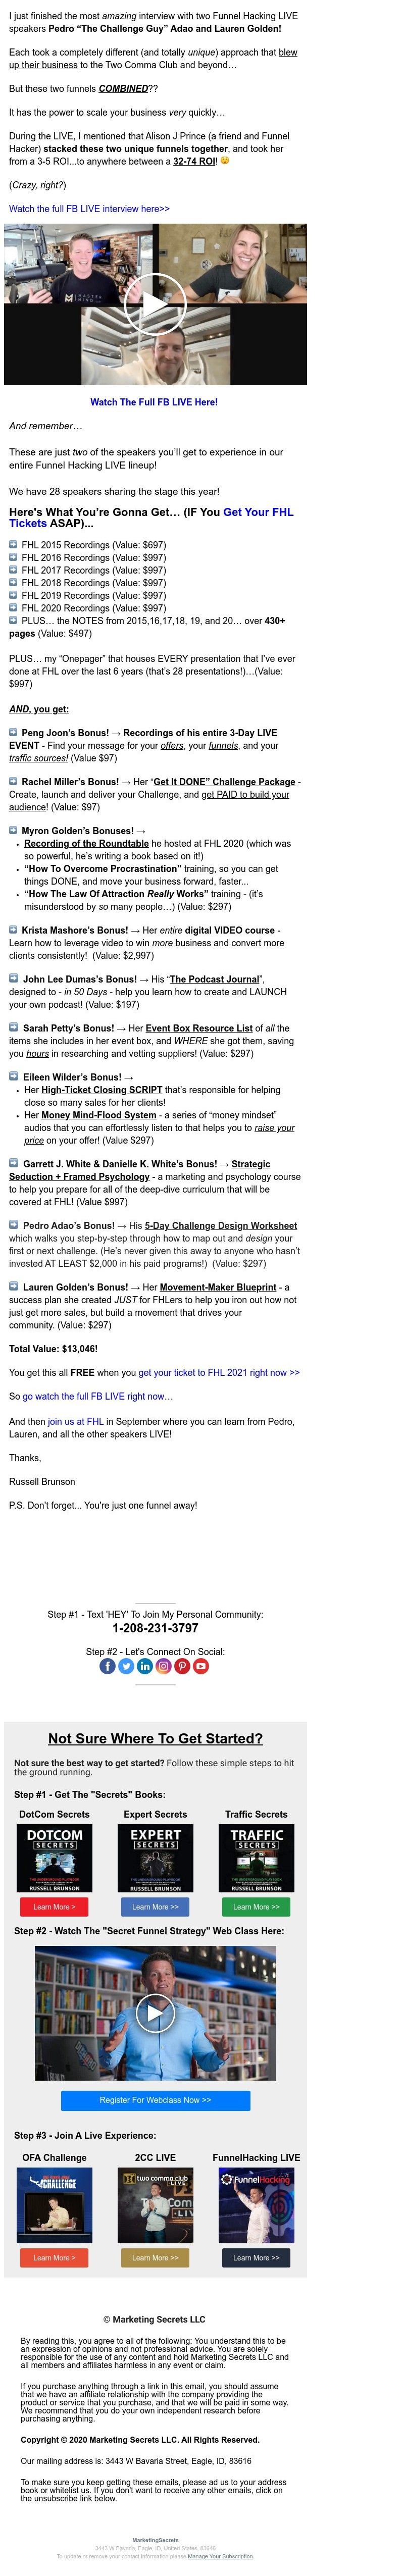 Screenshot of email with subject /media/emails/d573aee5-30b7-494a-b316-50bea75b4085.jpg